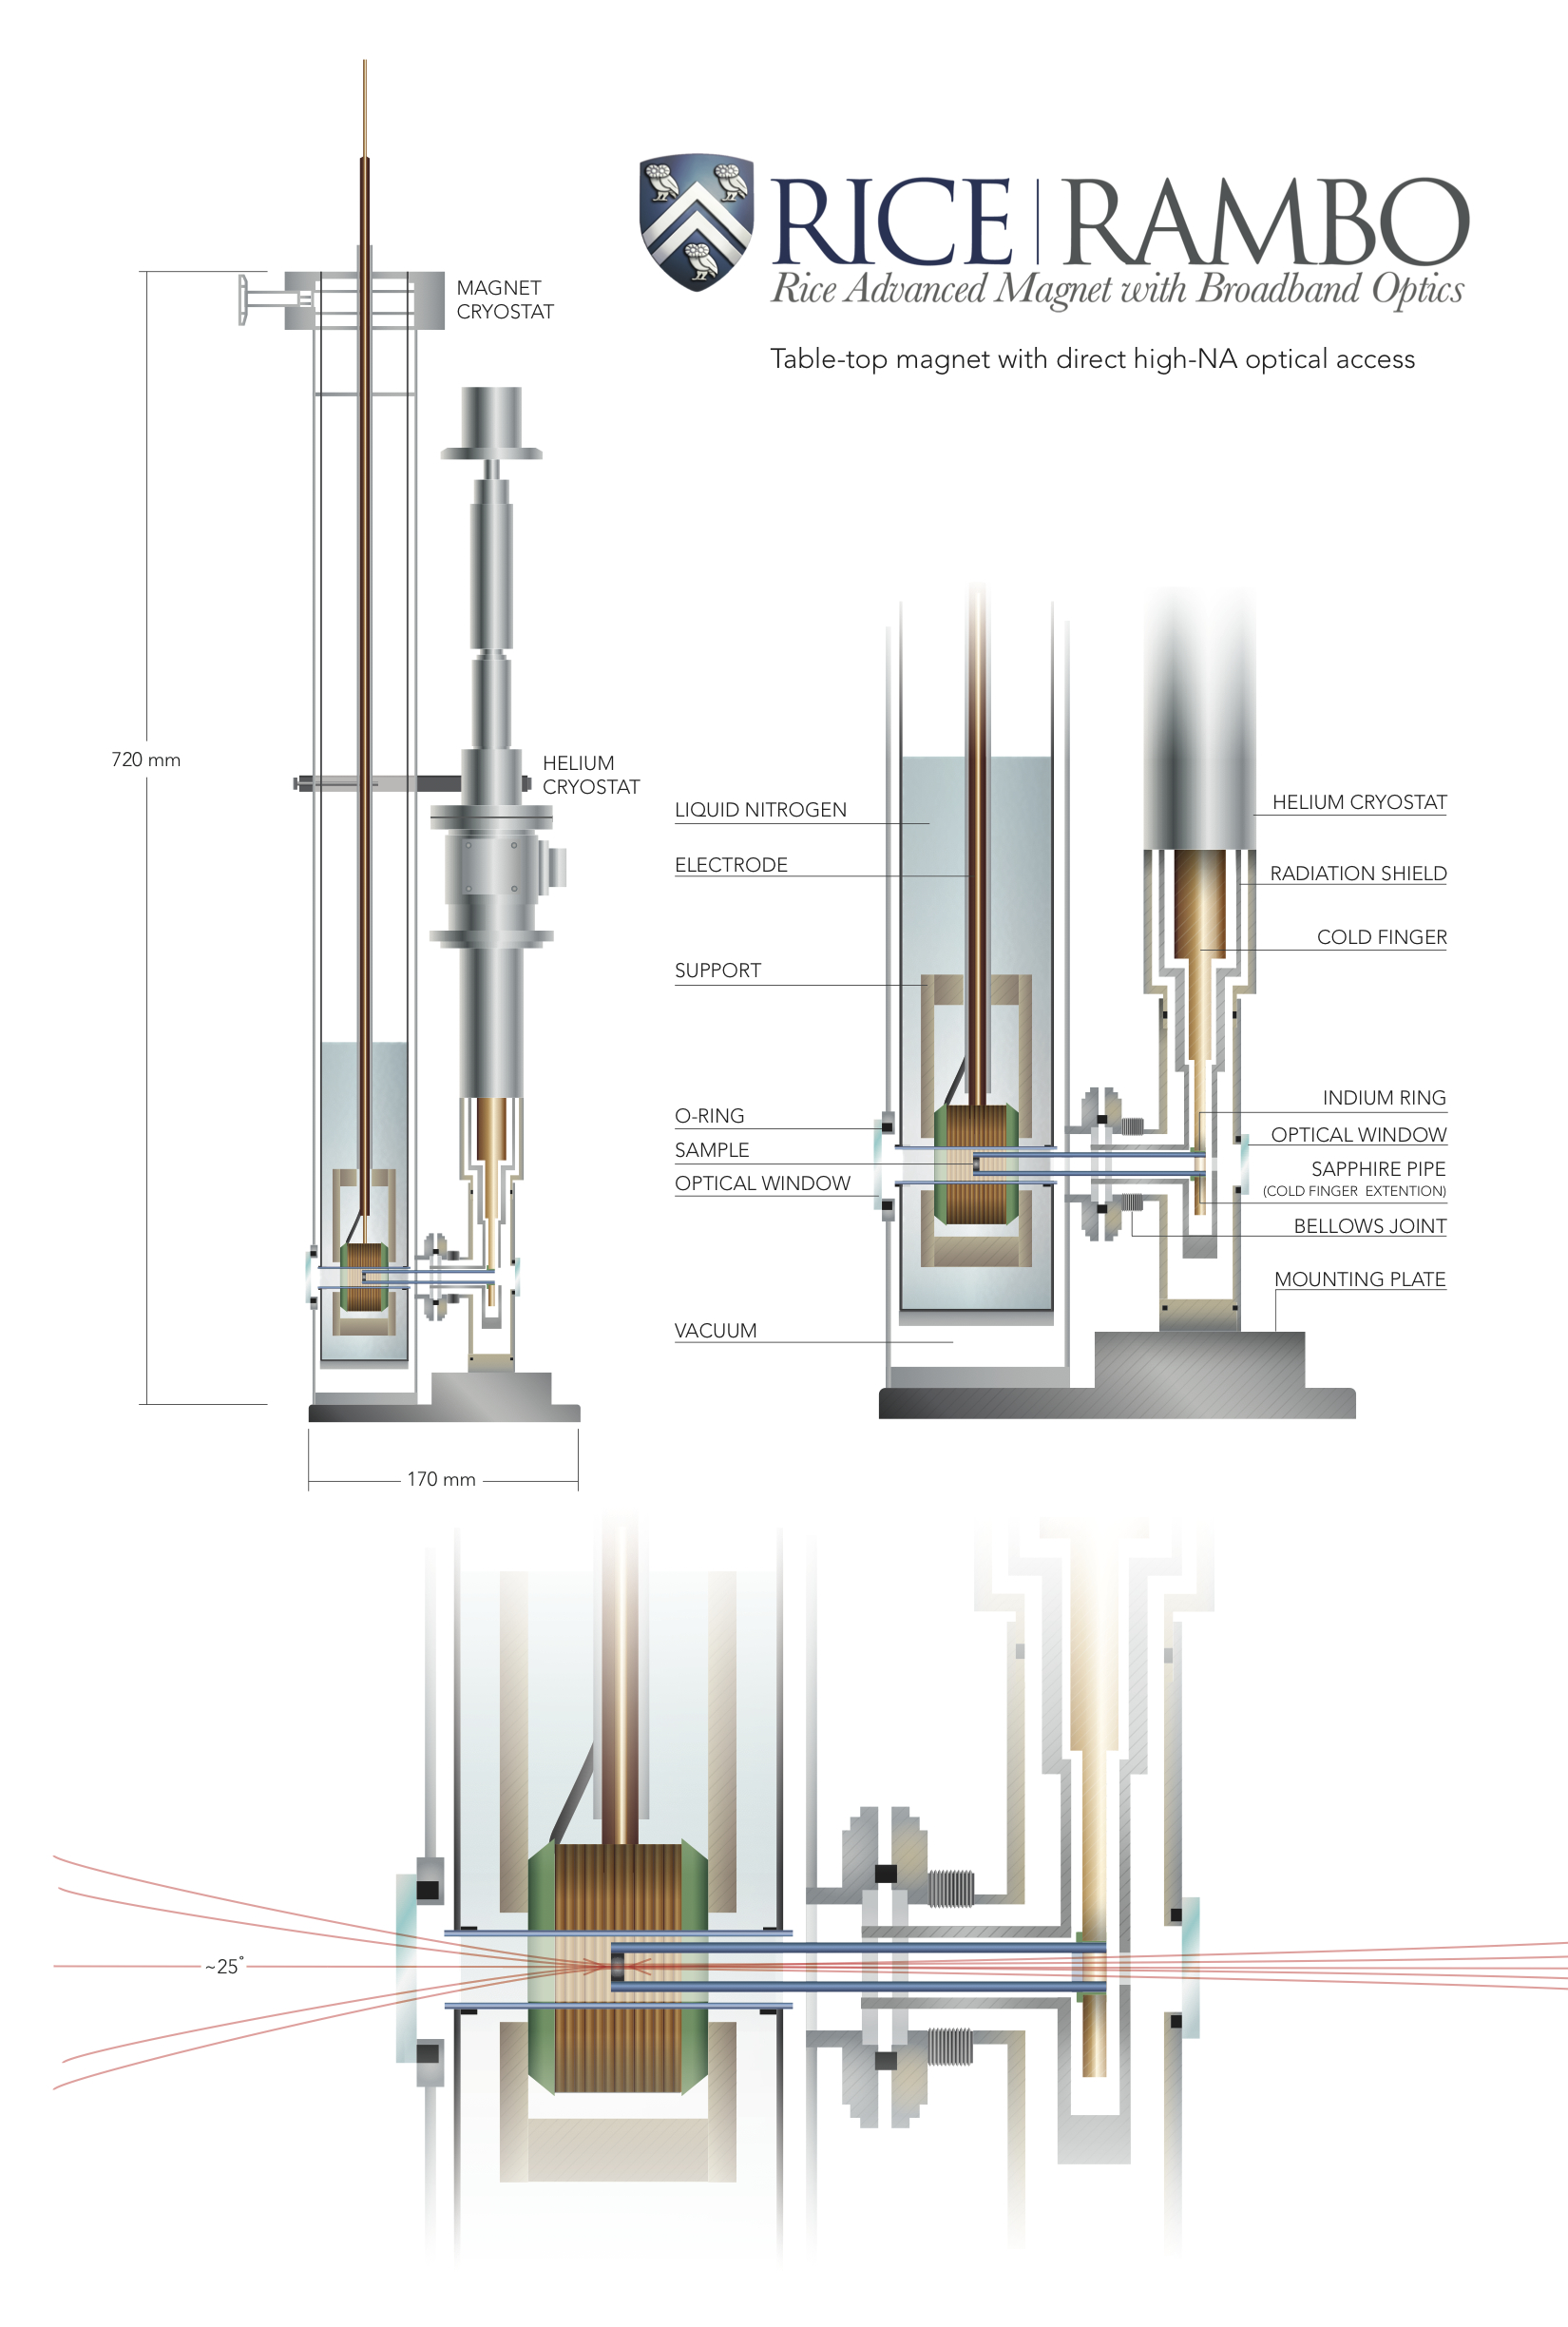 A graphic illustrates the setup and functions for the Rice Advanced Magnet with Broadband Optics